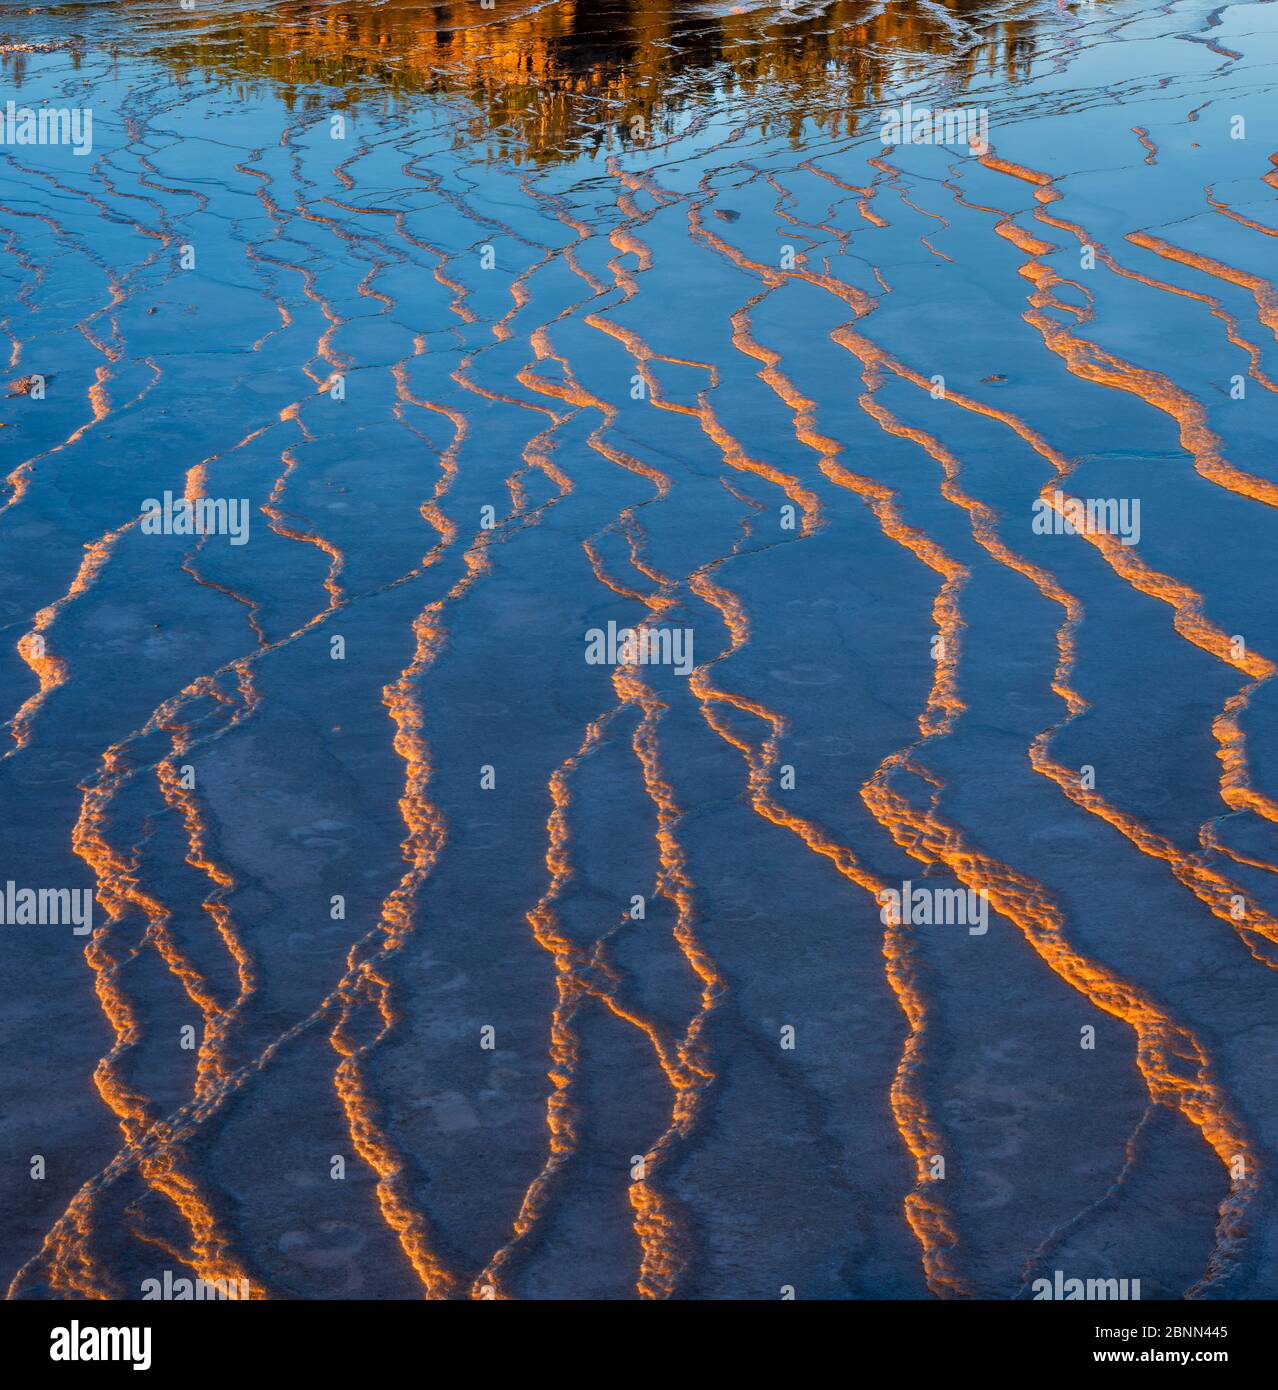 Patterns in the bacterial mats in afternoon light. Grand Prismatic spring, Middle Geyser Basin,Yellowstone National Park,  Wyoming, USA. Stock Photo